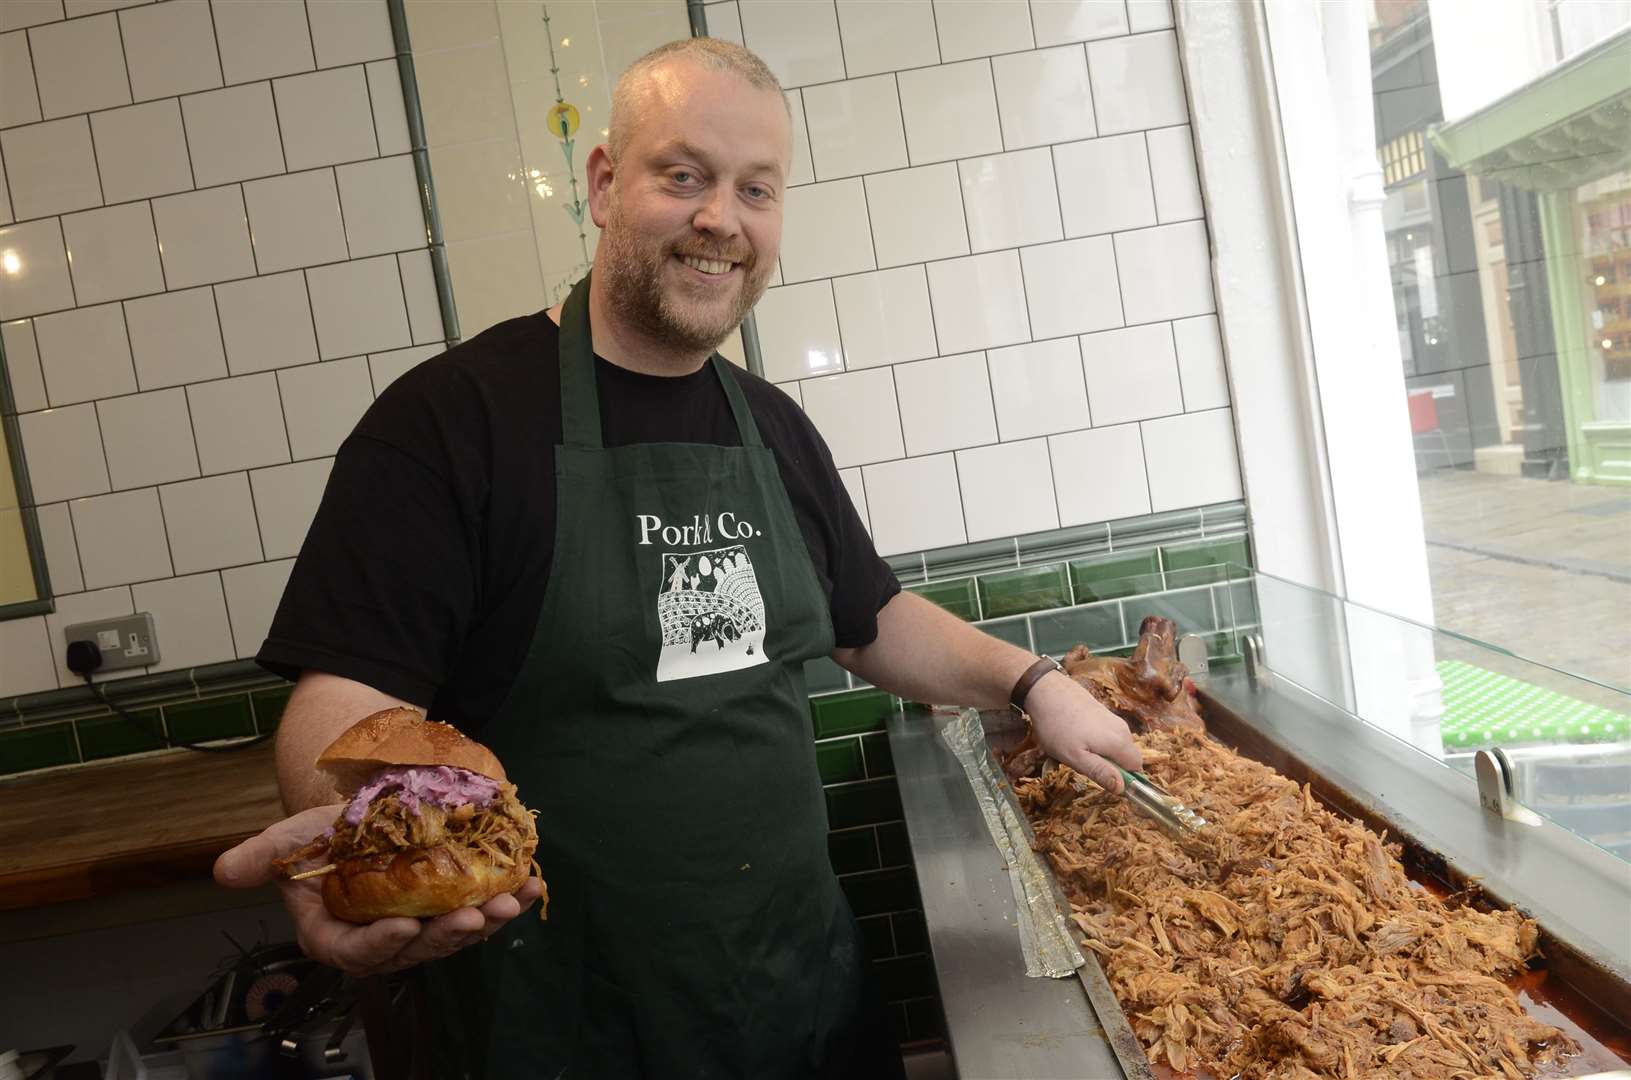 Sam Deeson already runs popular Pork and Co branches in Canterbury, Margate and Broadstairs